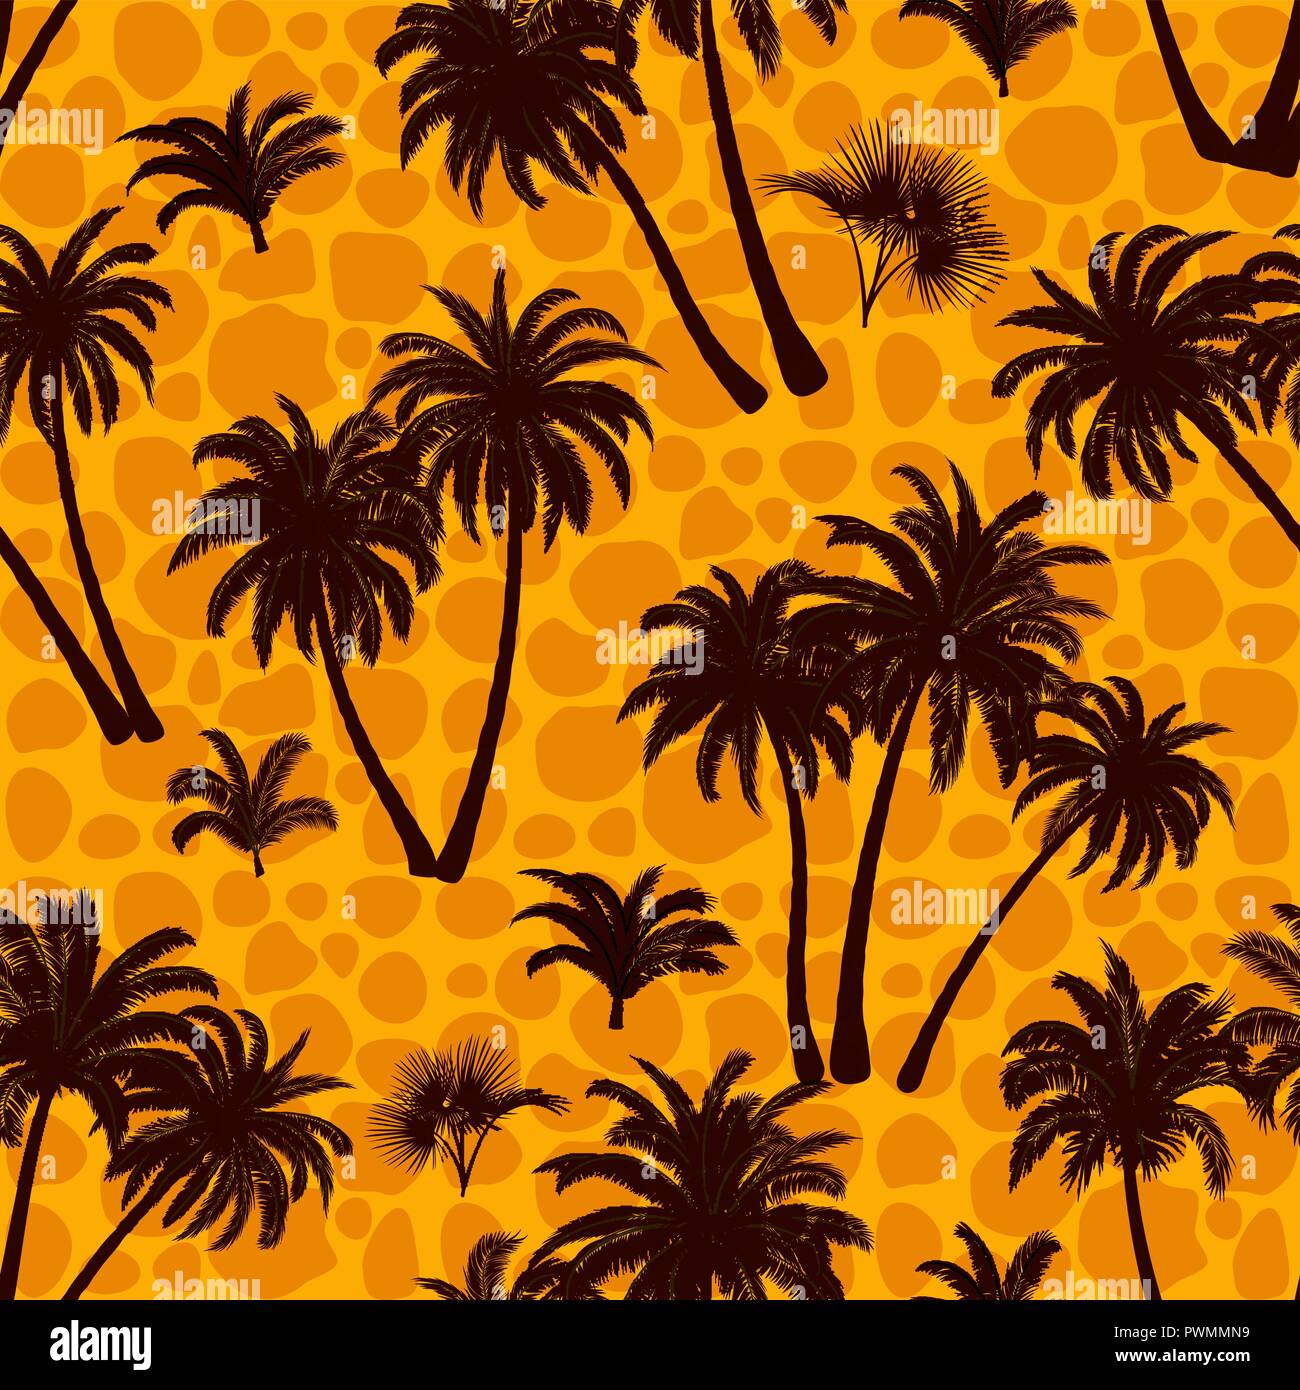 Seamless Pattern, Tropical Landscape, Palms Trees and Exotic Plants Black Silhouettes on Abstract Tile Background. Vector Stock Vector